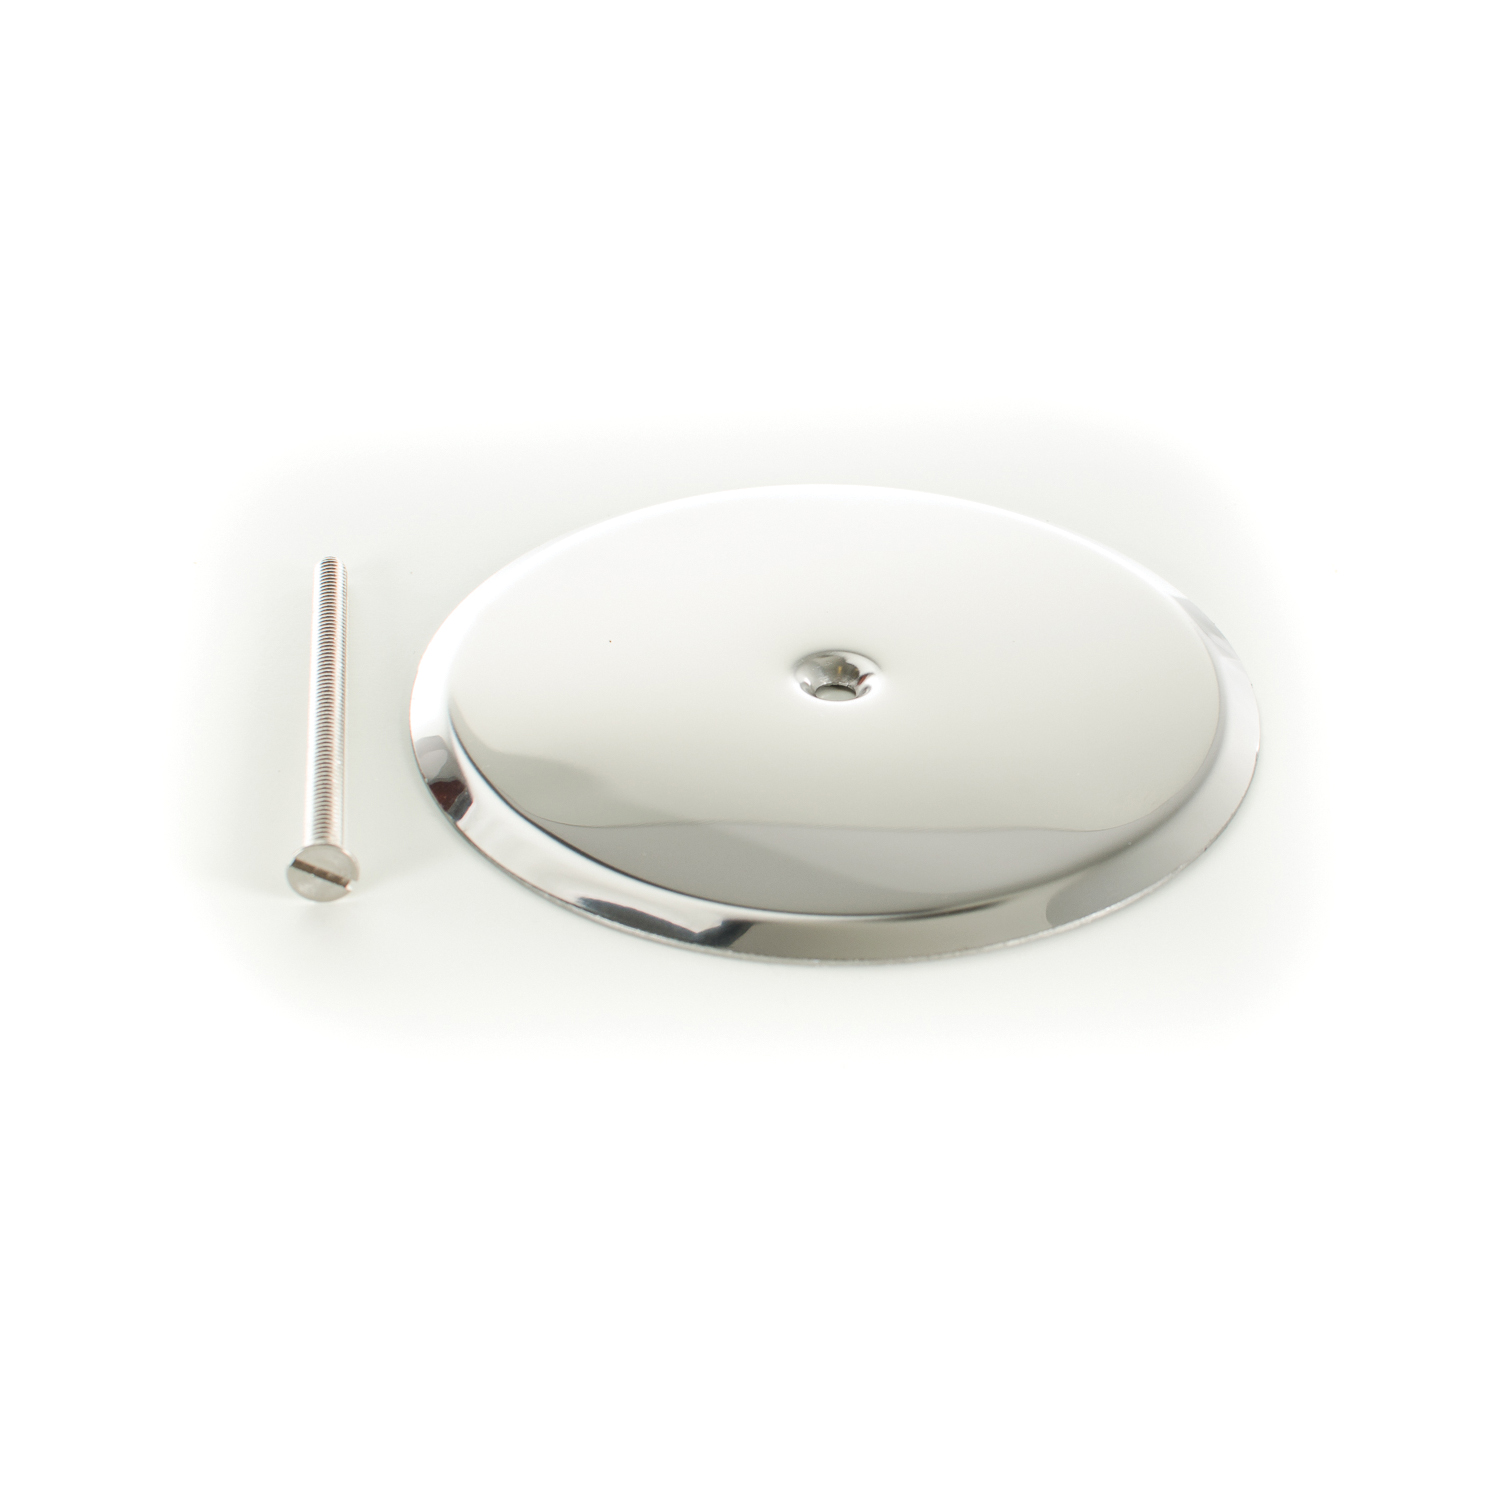 PASCO 1843 Cleanout Cover Plate With 1/4-20 x 4 in Bolt, 6 in Cover, 22 ga Stainless Steel